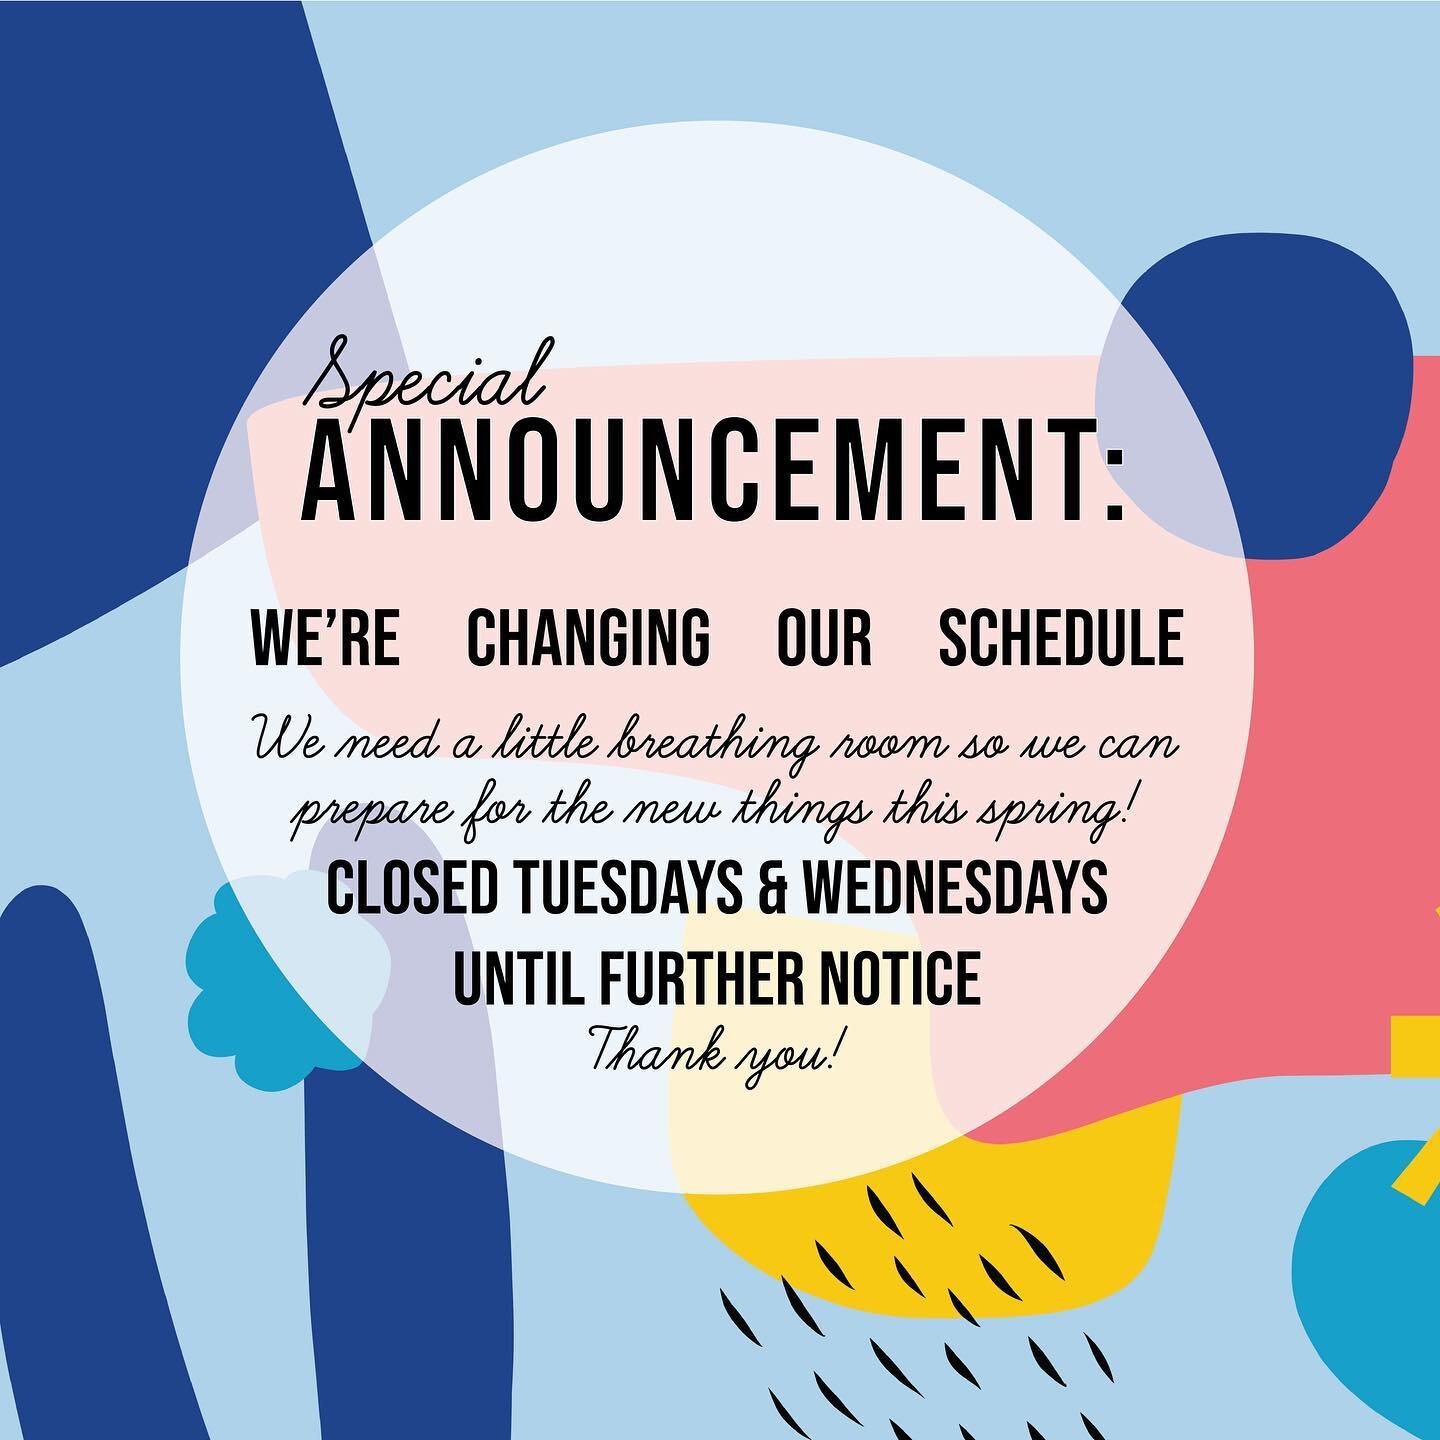 Hey y&rsquo;all 👋 We&rsquo;re going to be closed on Tuesdays &amp; Wednesdays for a little bit. Our team needs some slack in our operations so we can gear up for new changes this Spring (like re-opening the shop for takeout service &amp; bodega)! We